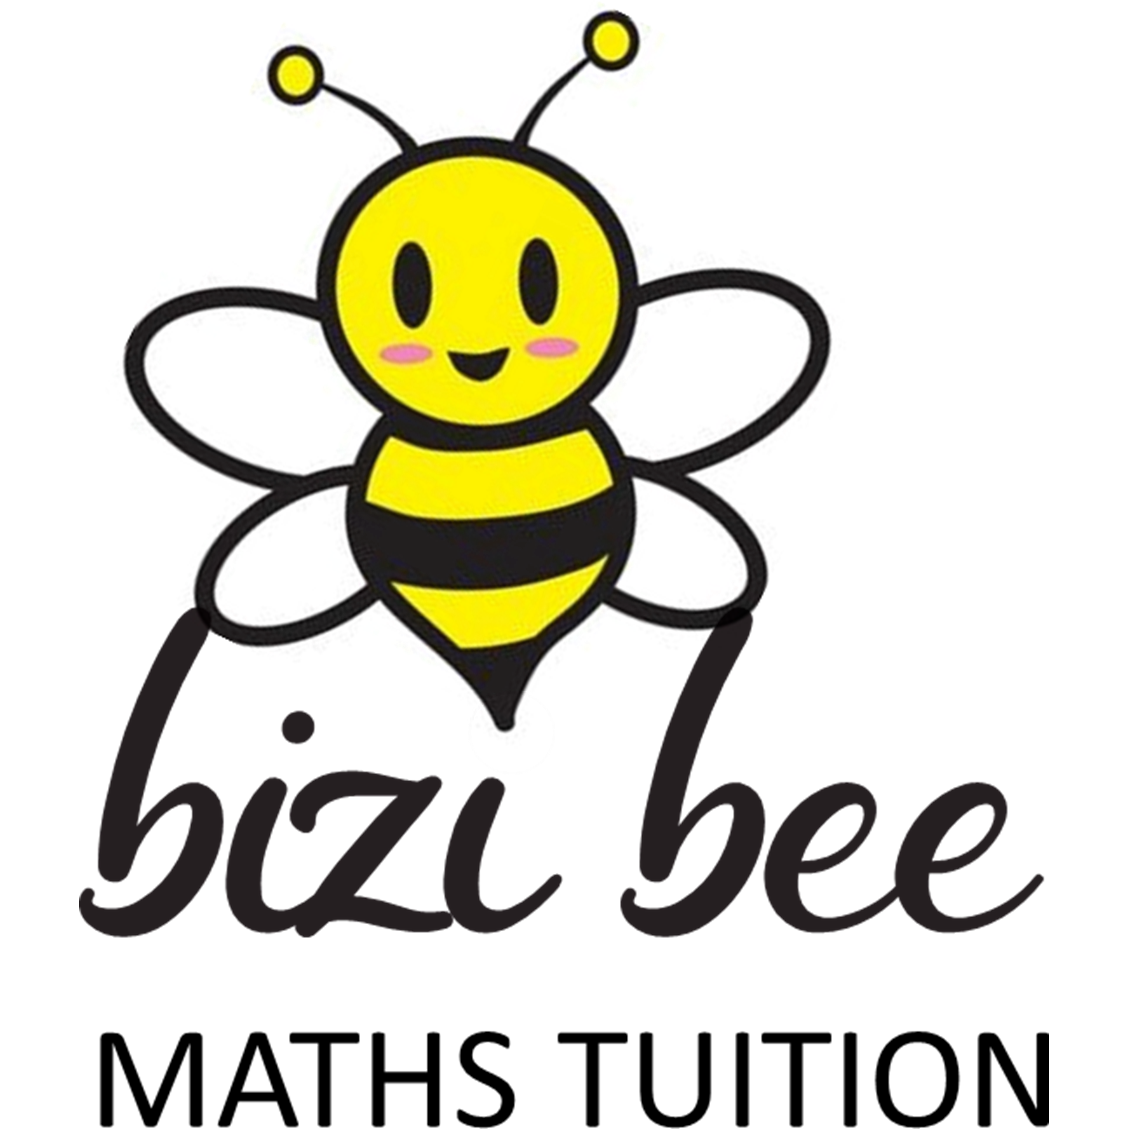 .pngLoveLocal Website and Graphic Design Logos Bizi Bee 001